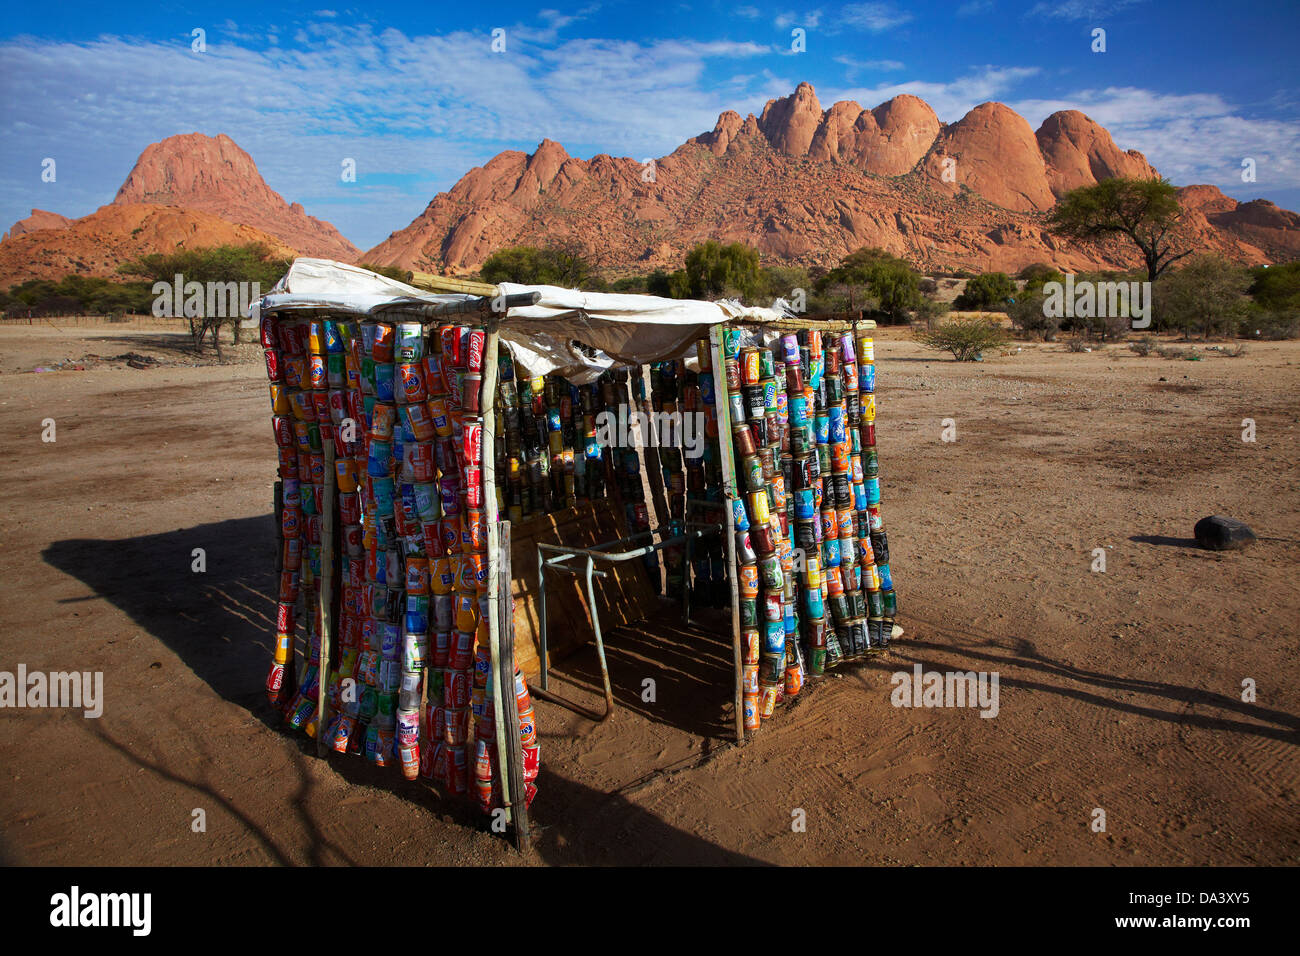 Shed made out of recycled drink cans, Spitzkoppe, and Pondok Mountains (right), Namibia, Africa Stock Photo